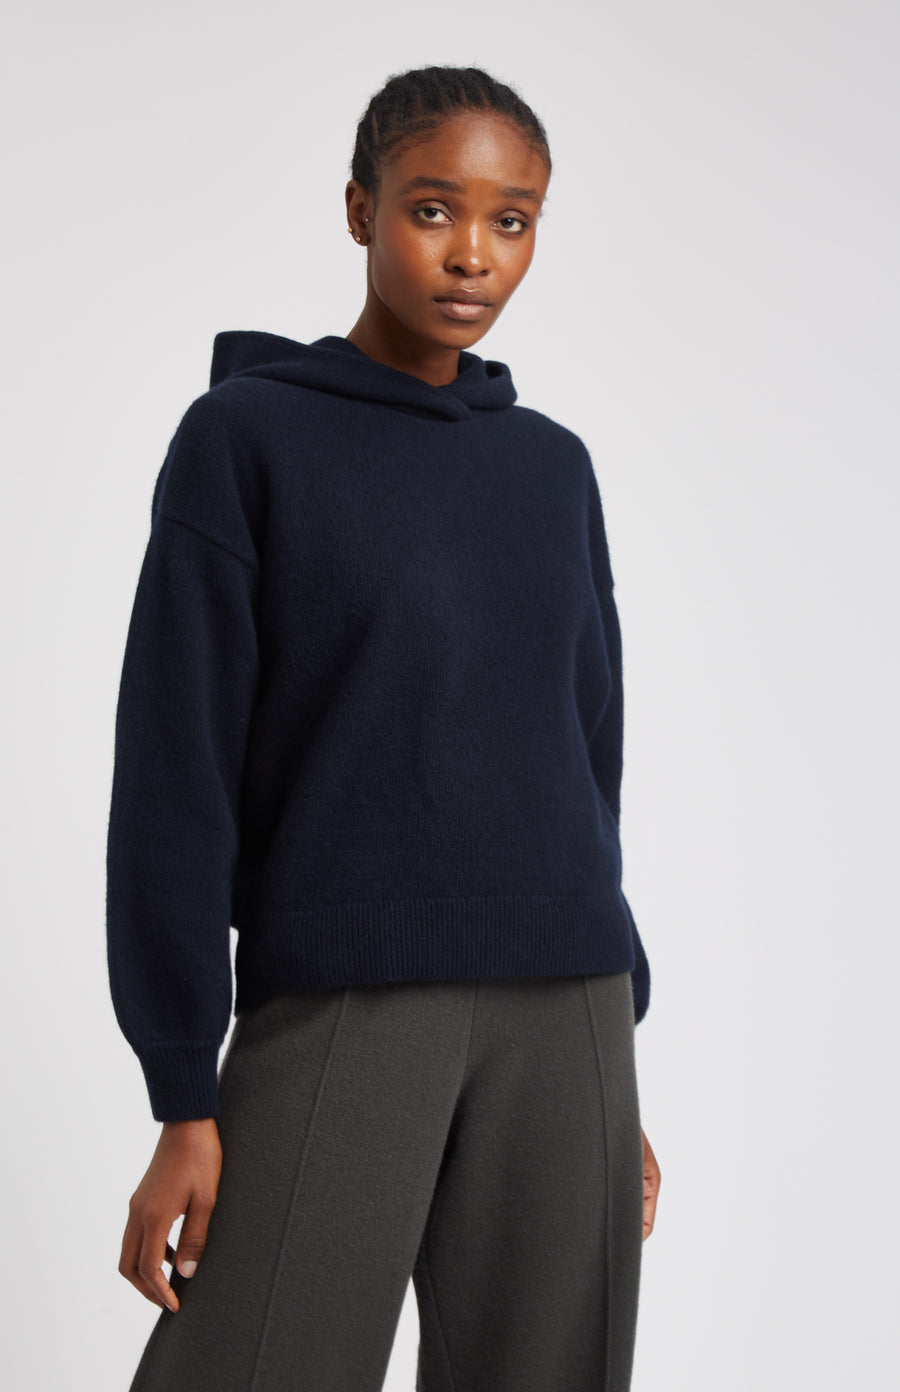 Women's Navy Cashmere Blend Hoodie Close Up View - Pringle of Scotland